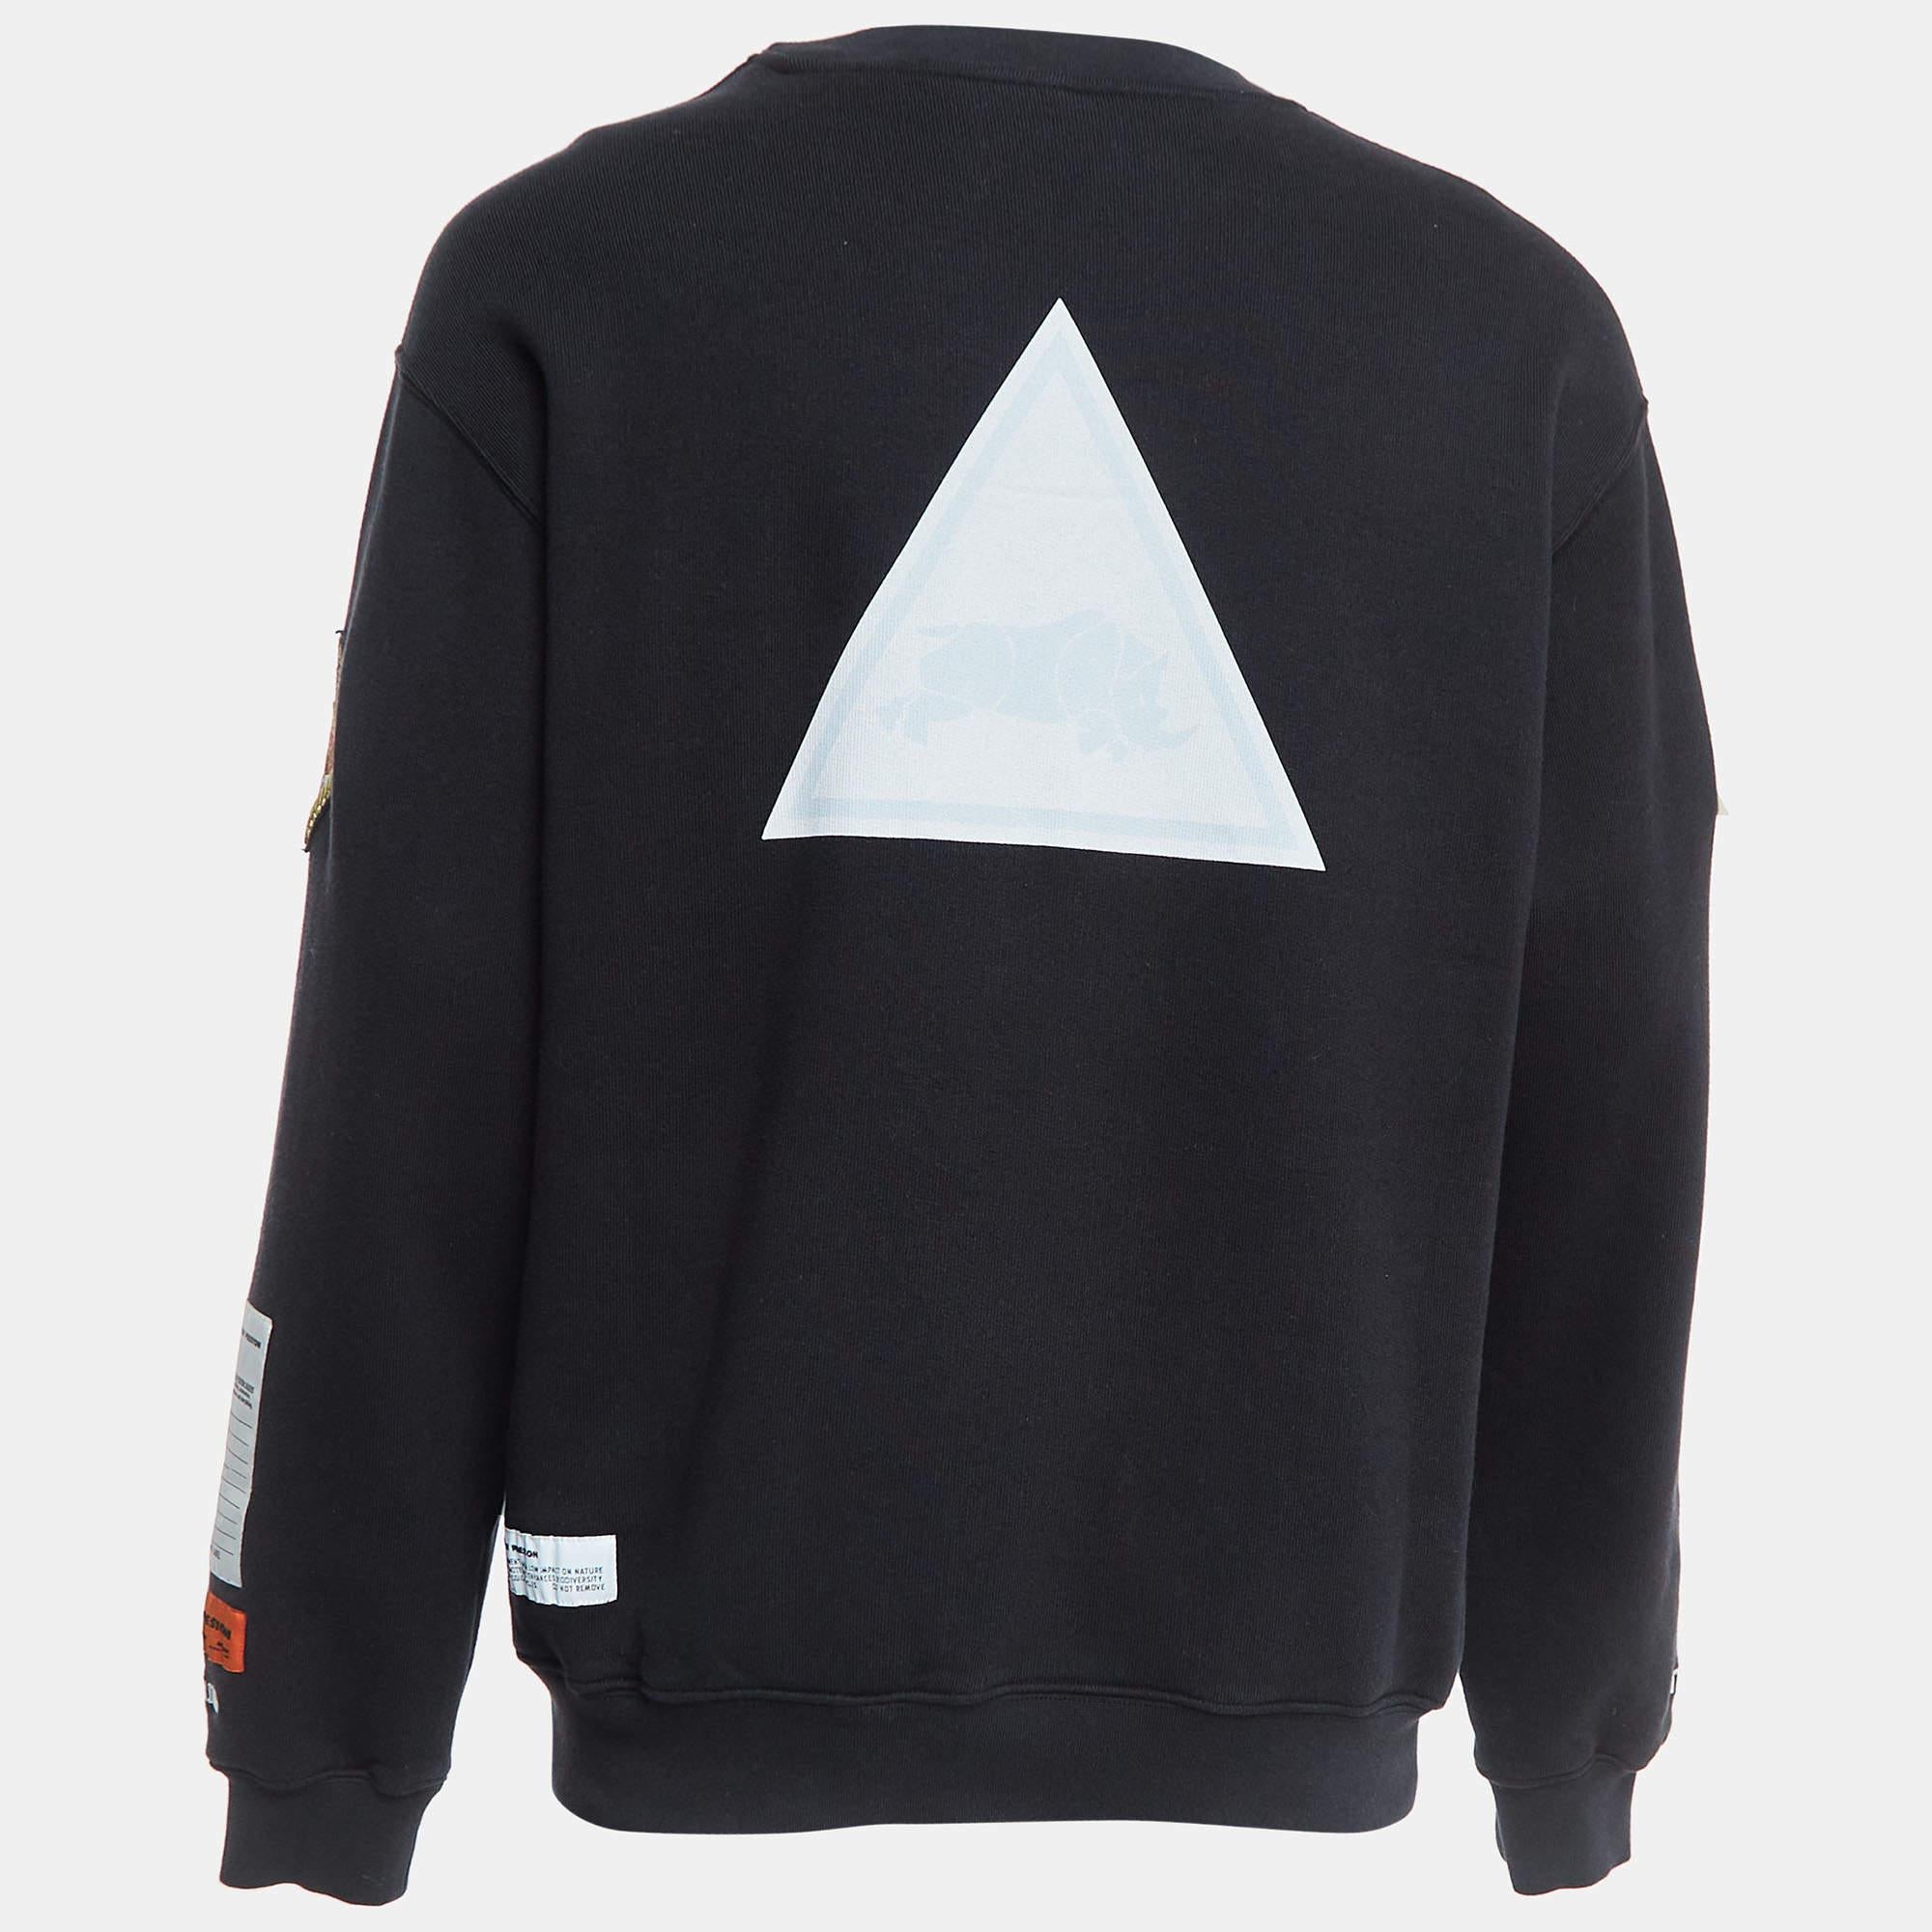 Discover luxe and ease with this Heron Preston men's sweatshirt. Crafted for both warmth and style, it combines comfort with fashion-forward detailing, making it your go-to choice for casual sophistication.

